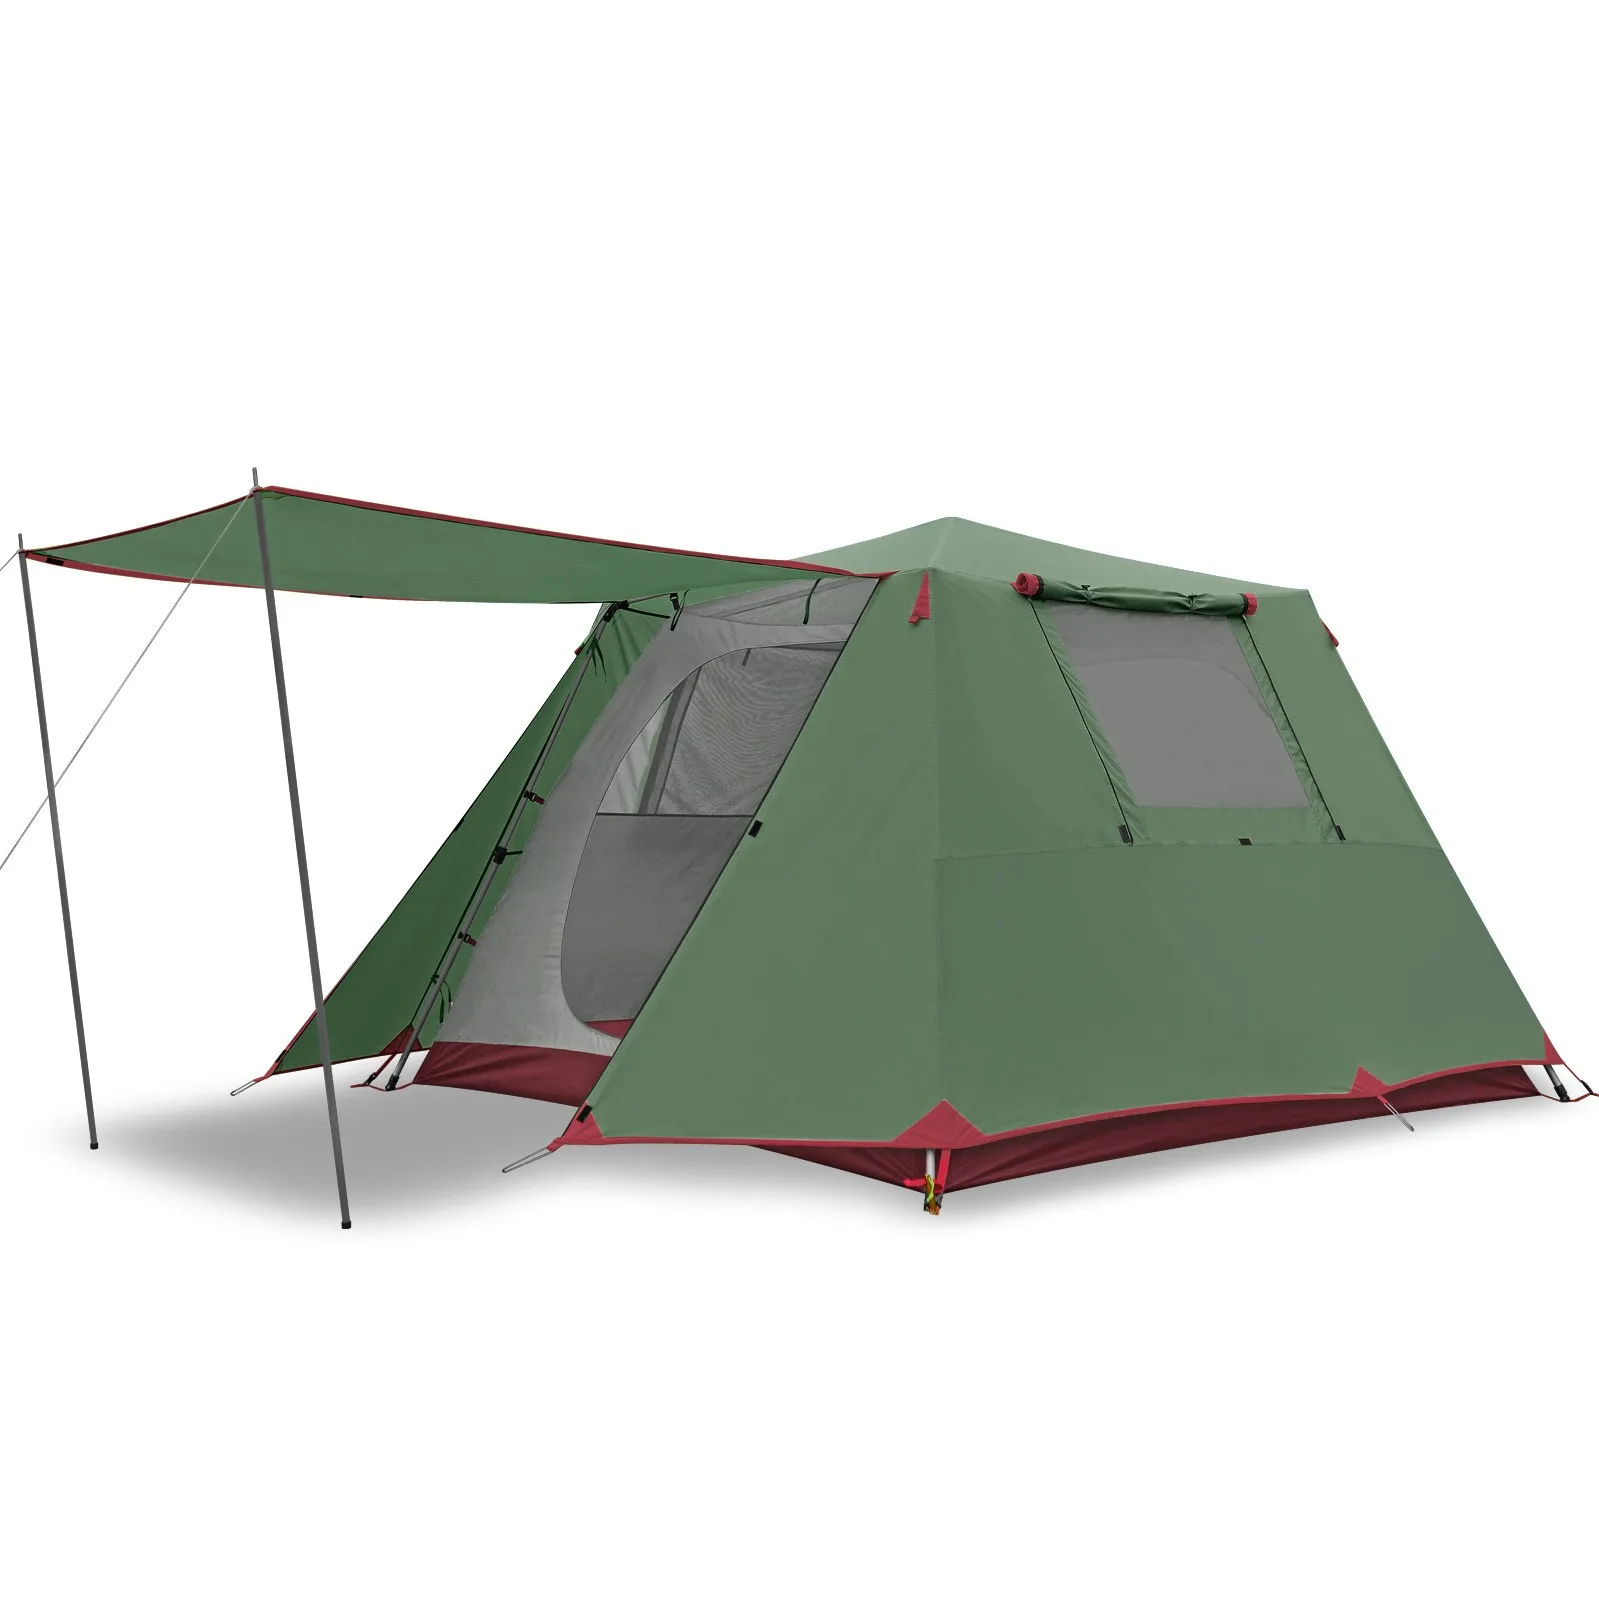 

Outdoor tents camping tent outdoor items Waterproof 4 Season 5-6 person folding tent Hiking Equipment, Yello,blue,dark green